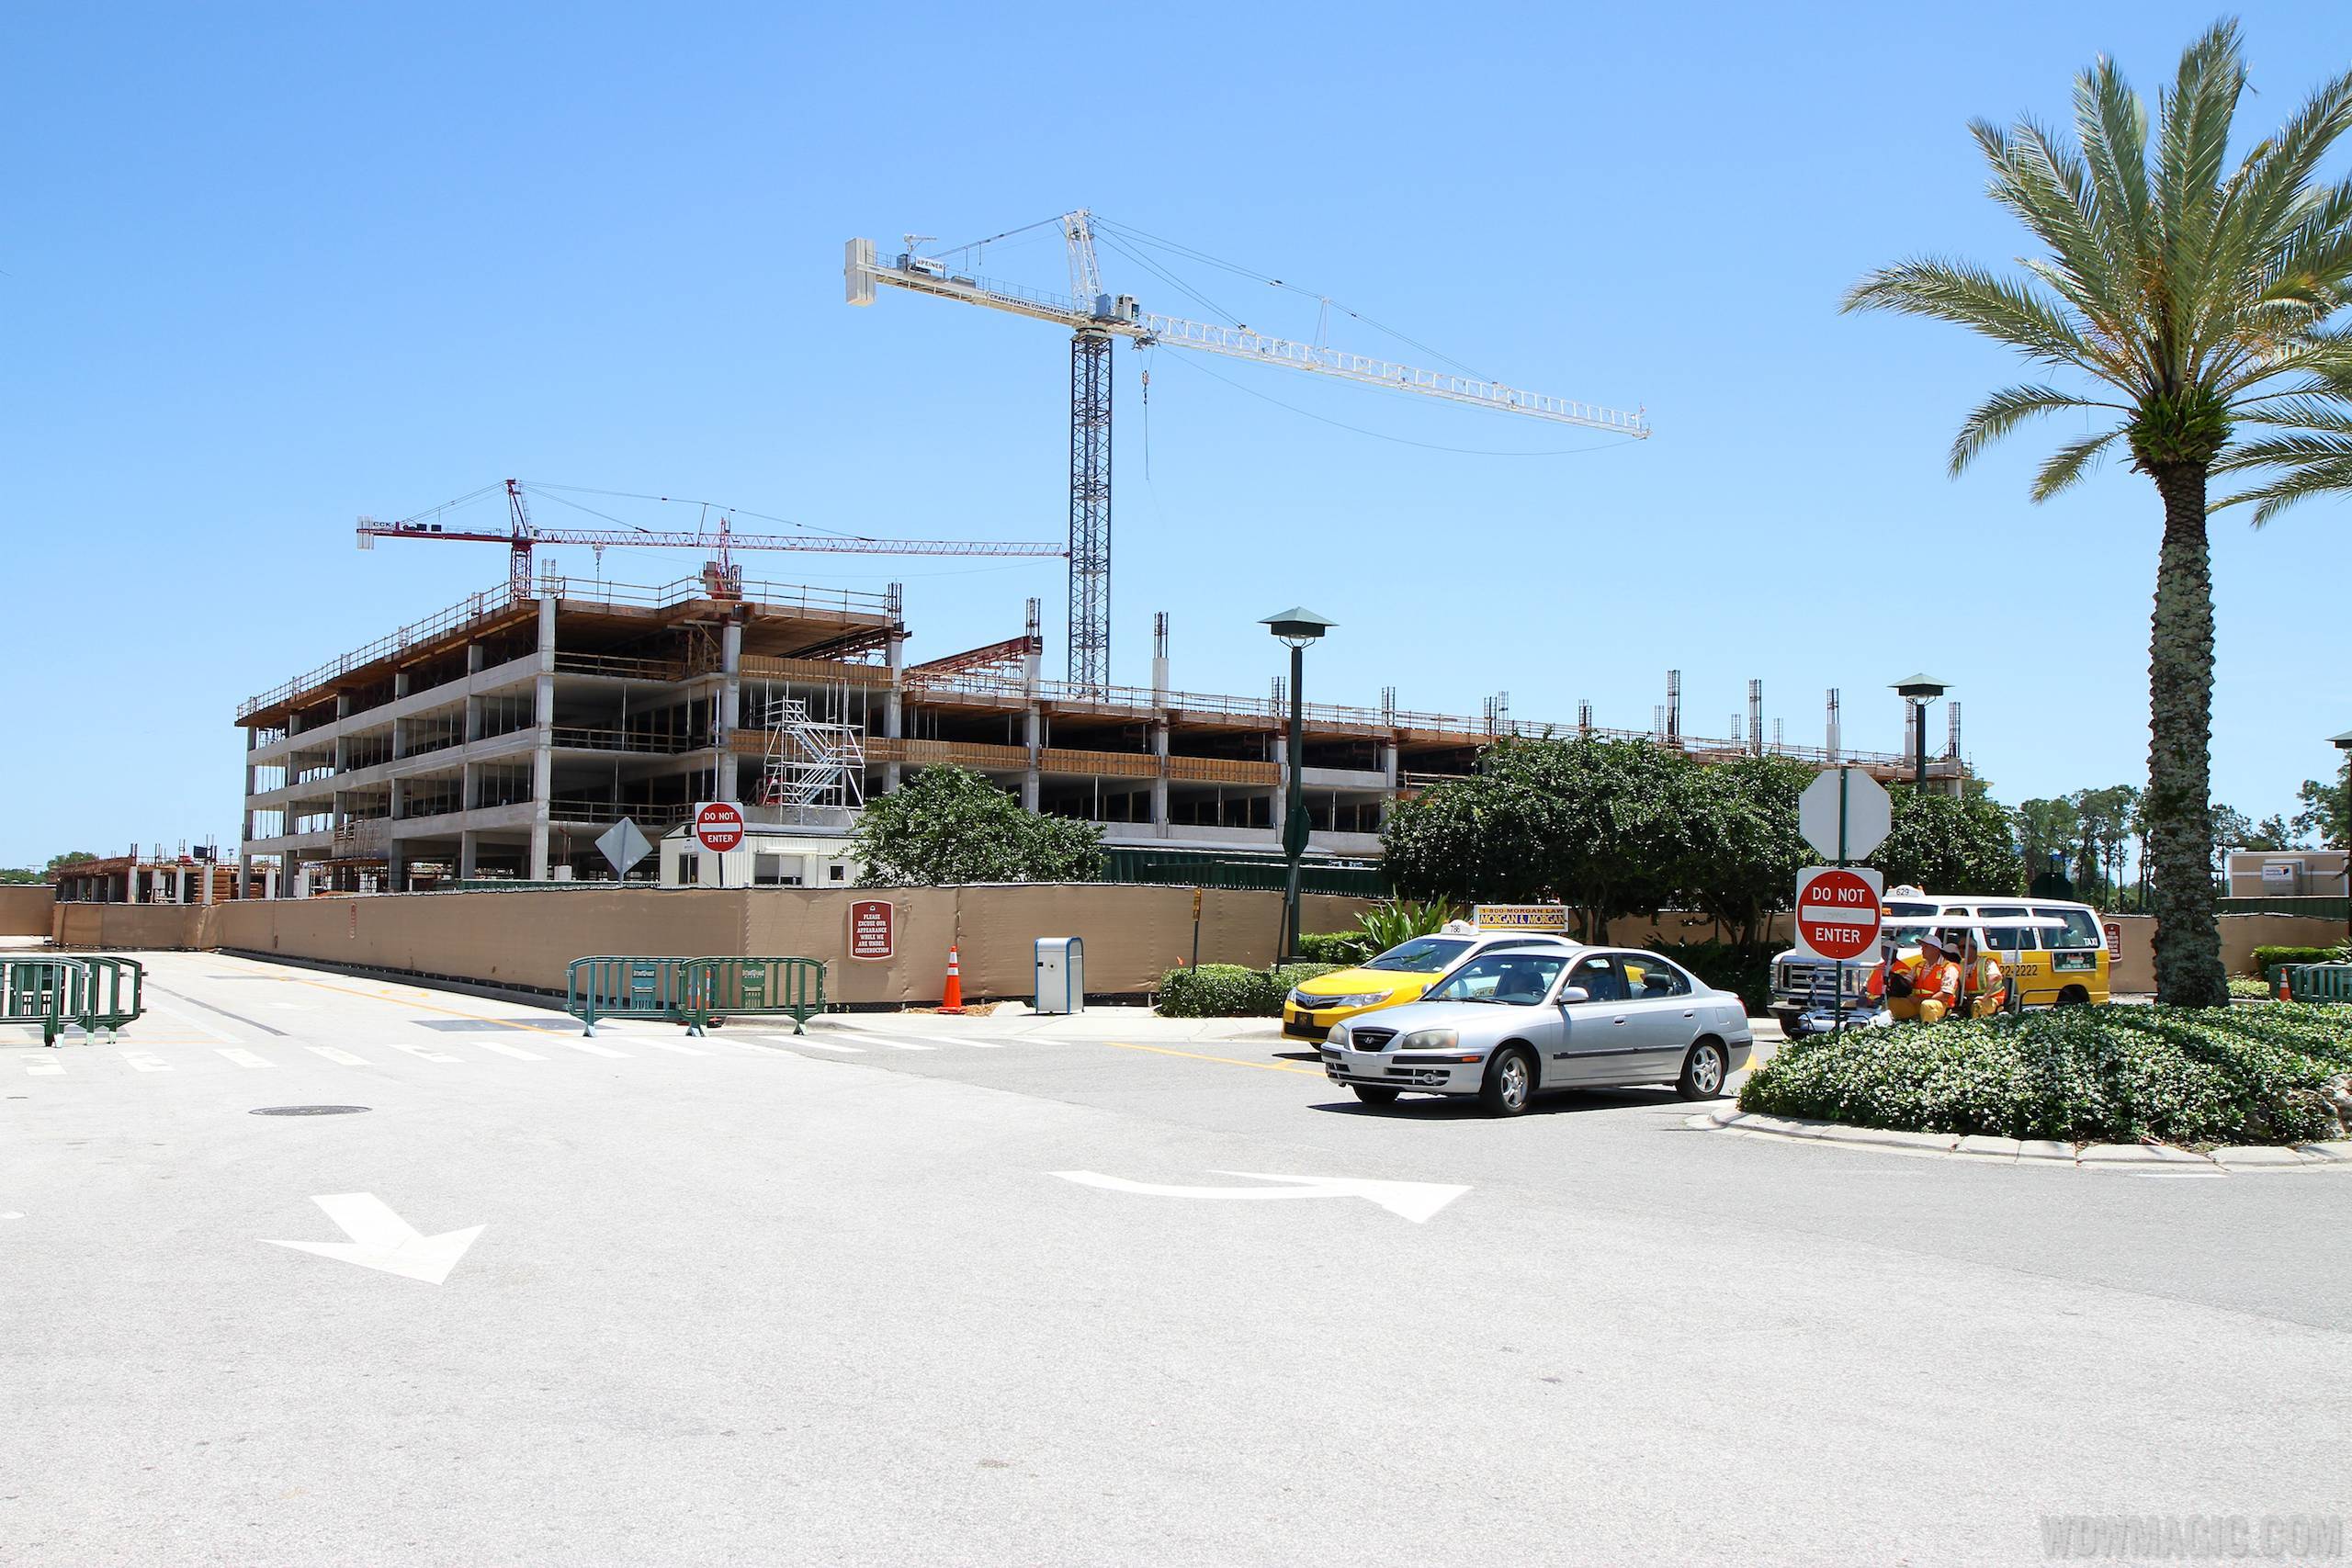 PHOTOS - Latest look at the Disney Springs West Side parking garage